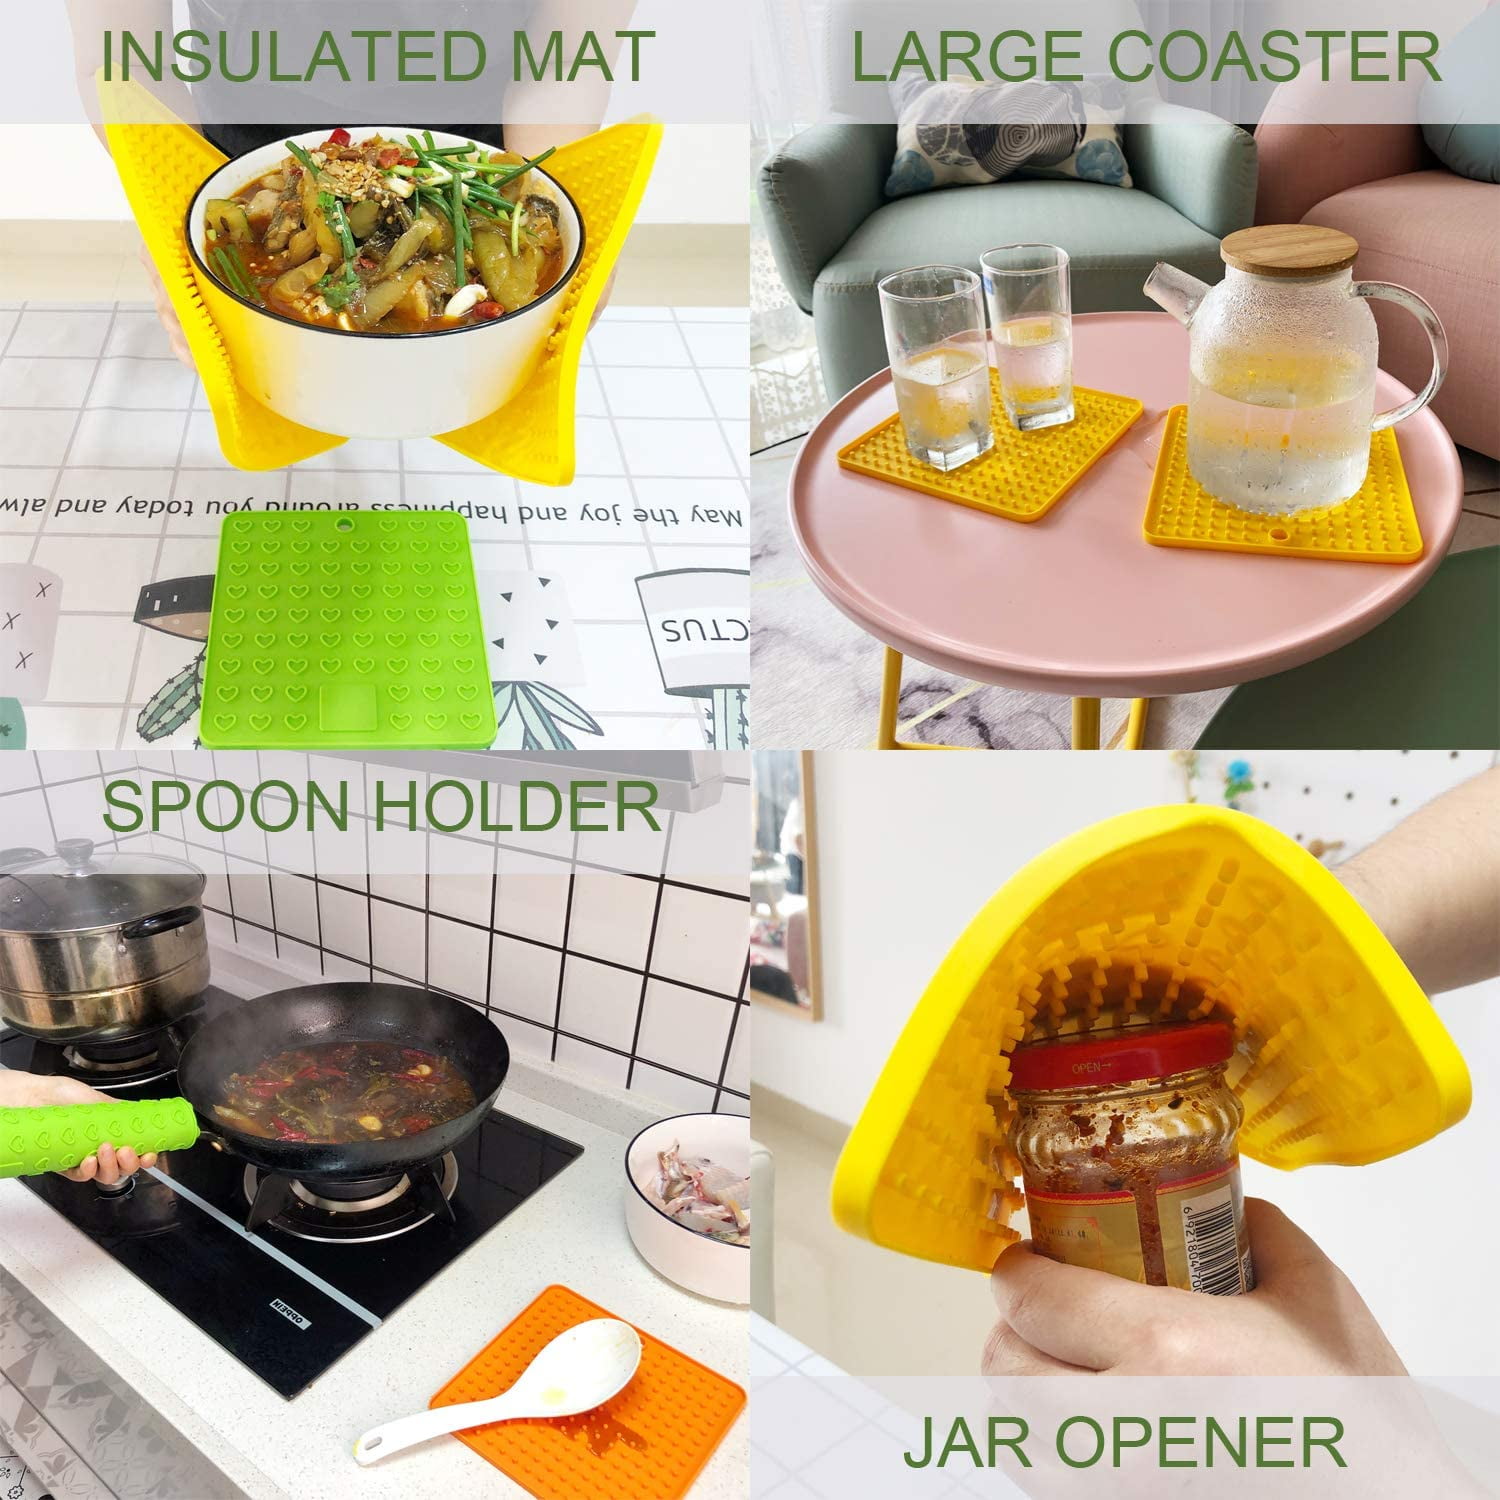 Premium Silicone Pot Holders for Kitchen - Easy to Clean Trivets for Hot  Pots and Pans - This Kitchen Tool Works Well as Silicone Trivet, Hot Pads  for Oven, Potholders 